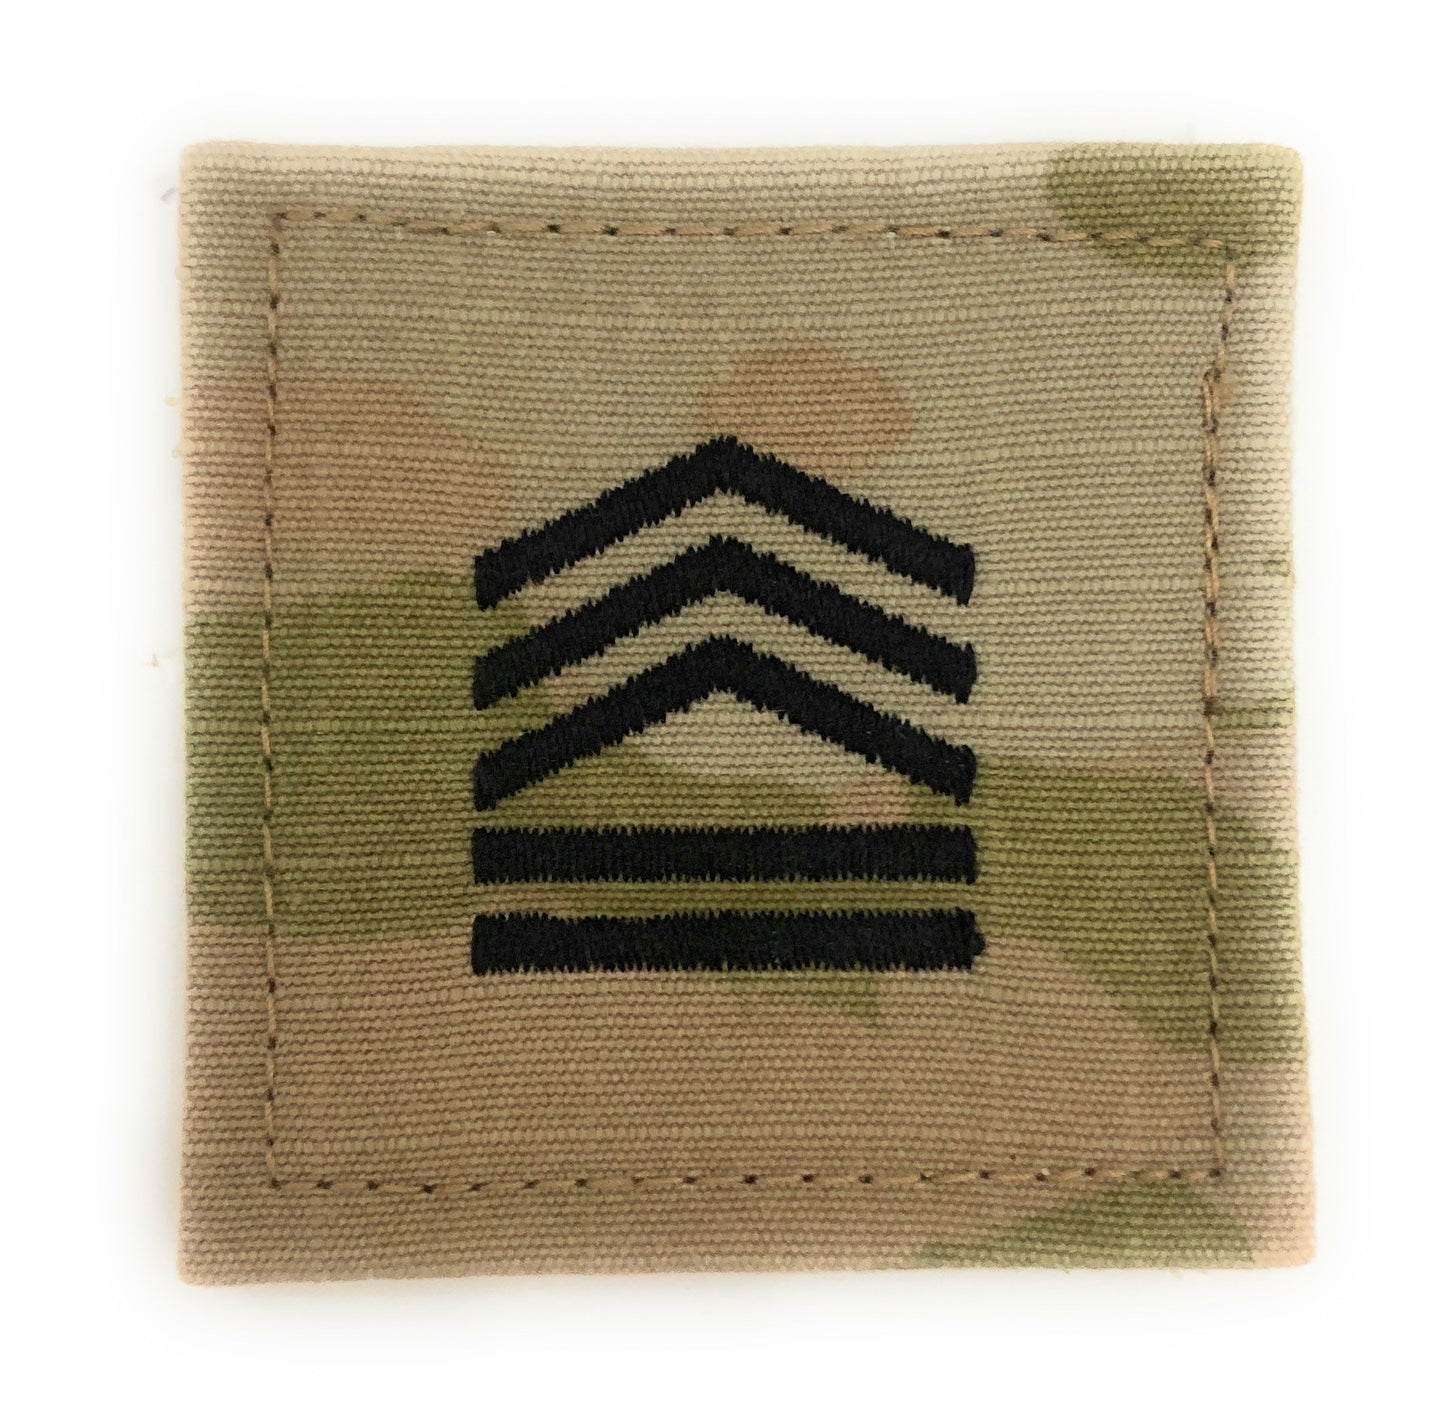 ROTC Sergeant First Class OCP Rank with Hook Fastener